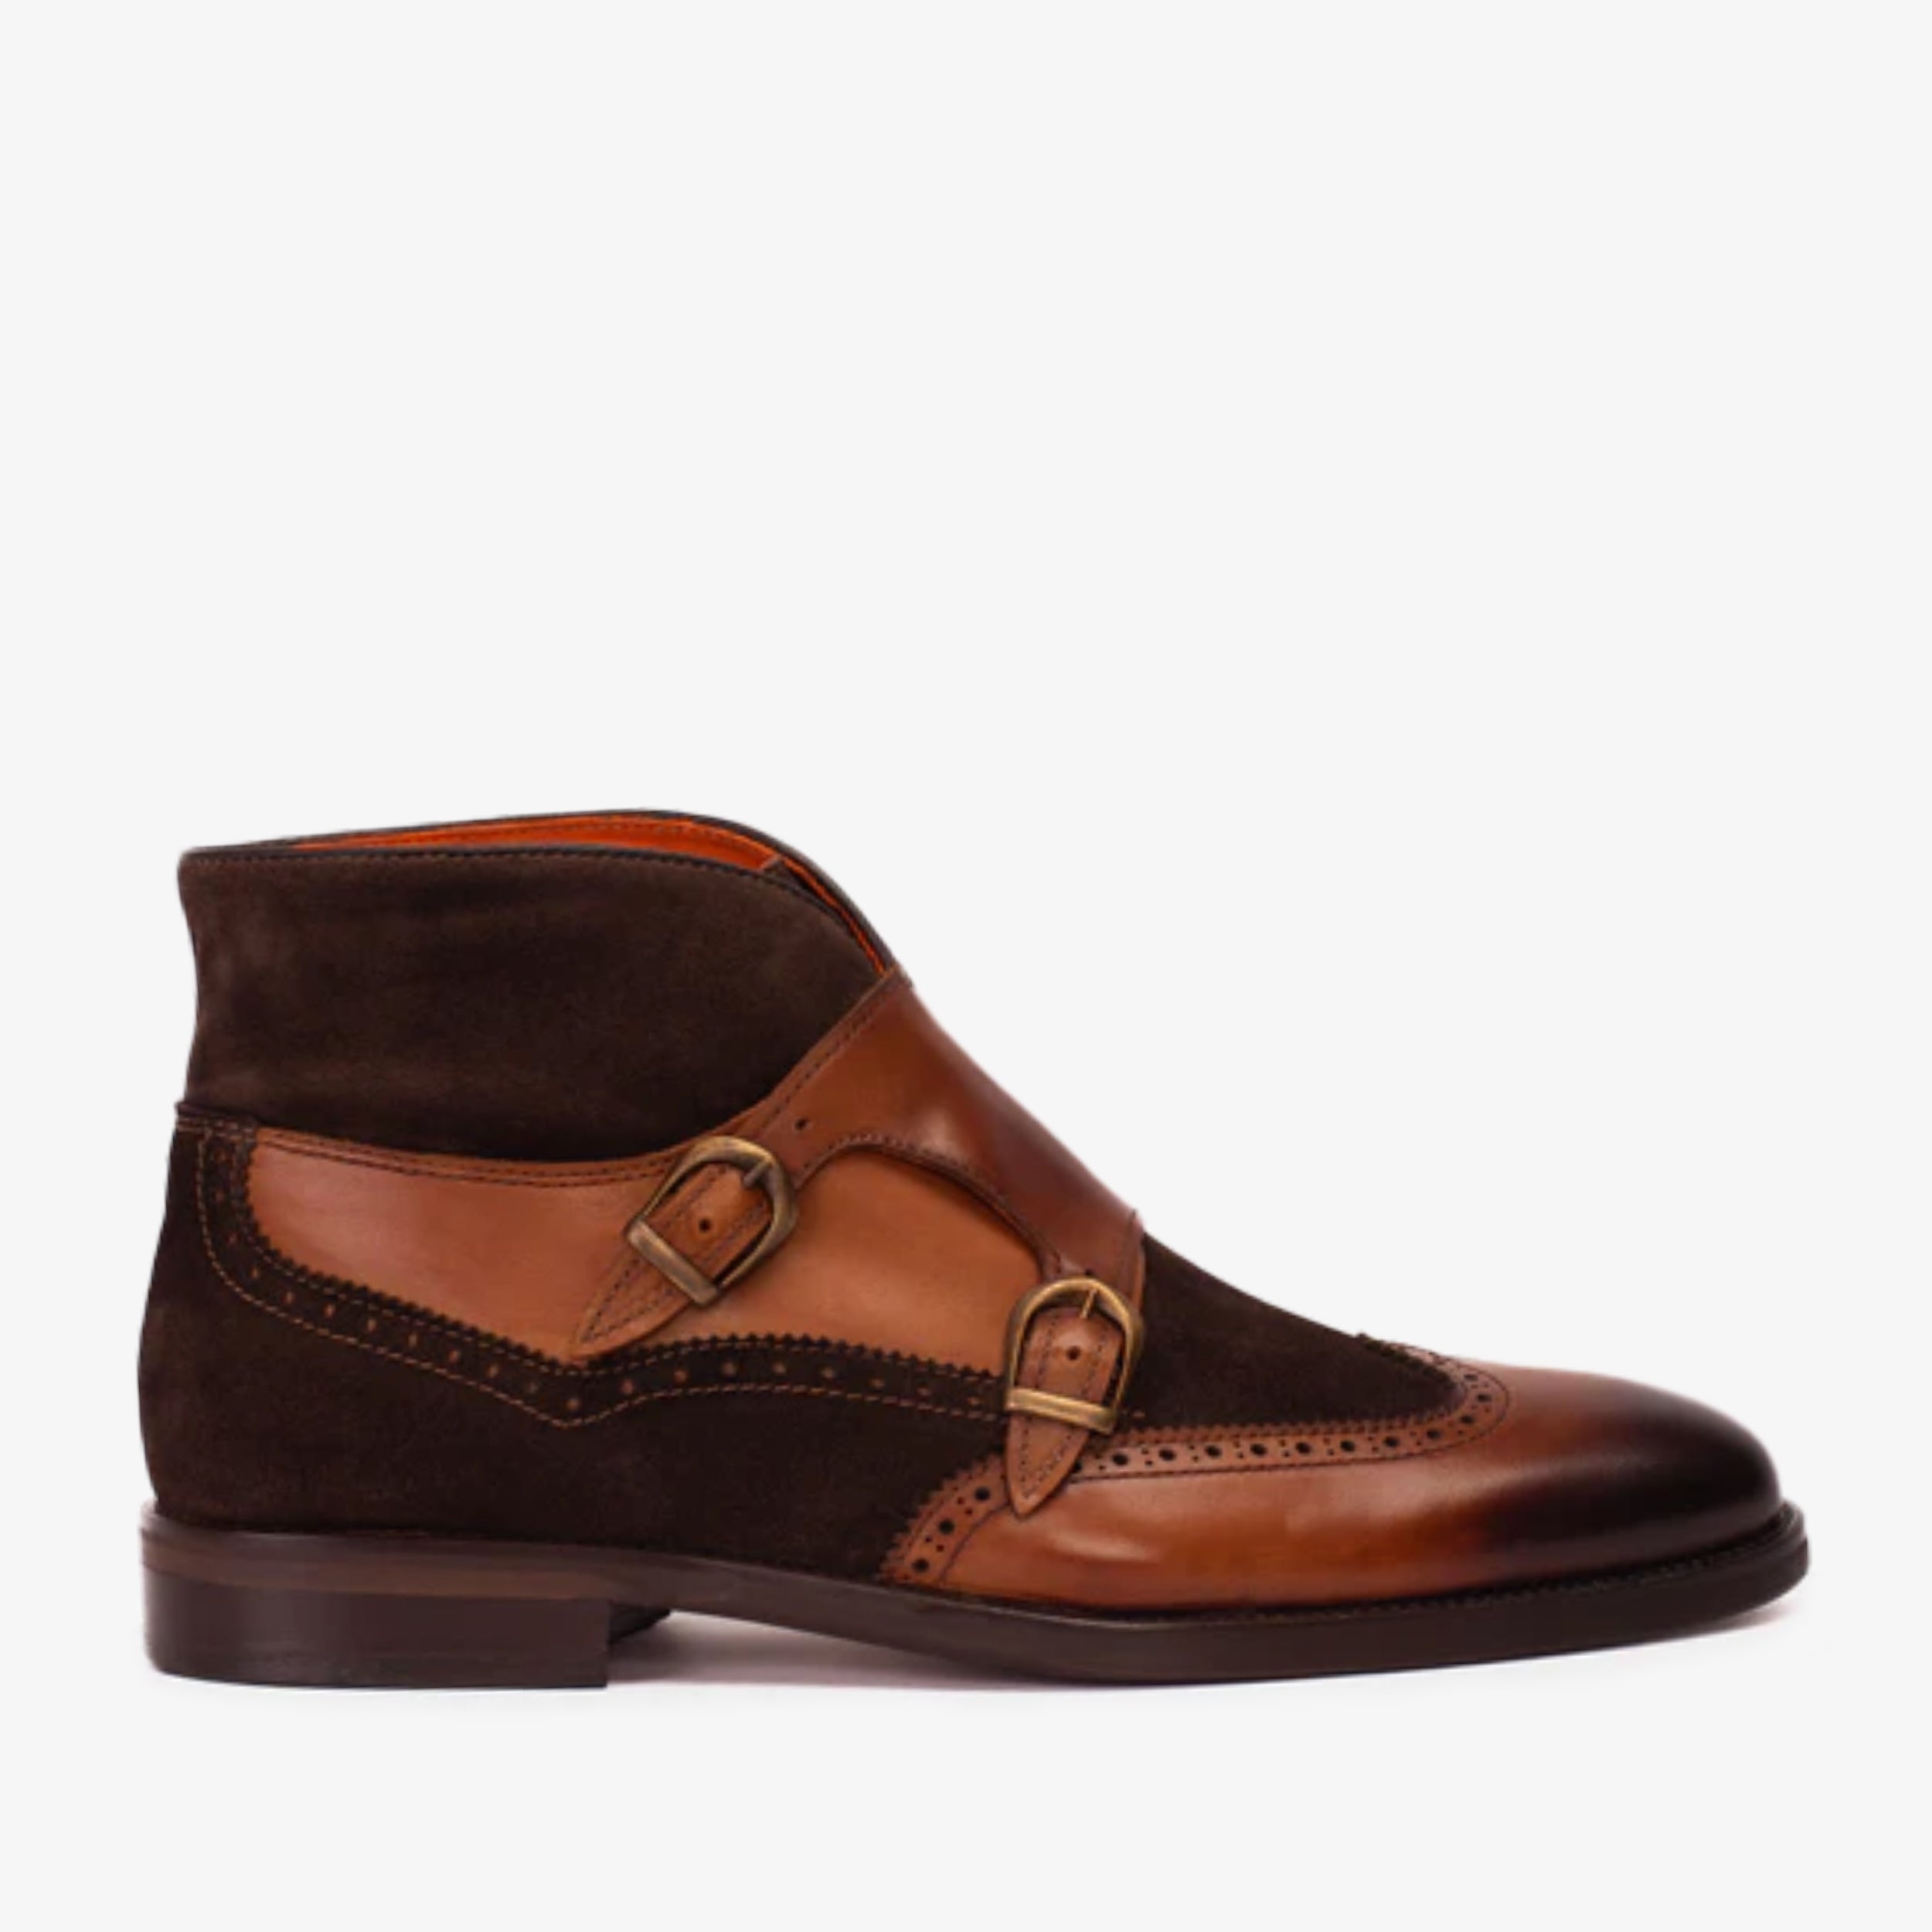 The Albus Tan Leather & Suede Double Strap Monk Brogue Men  Boot